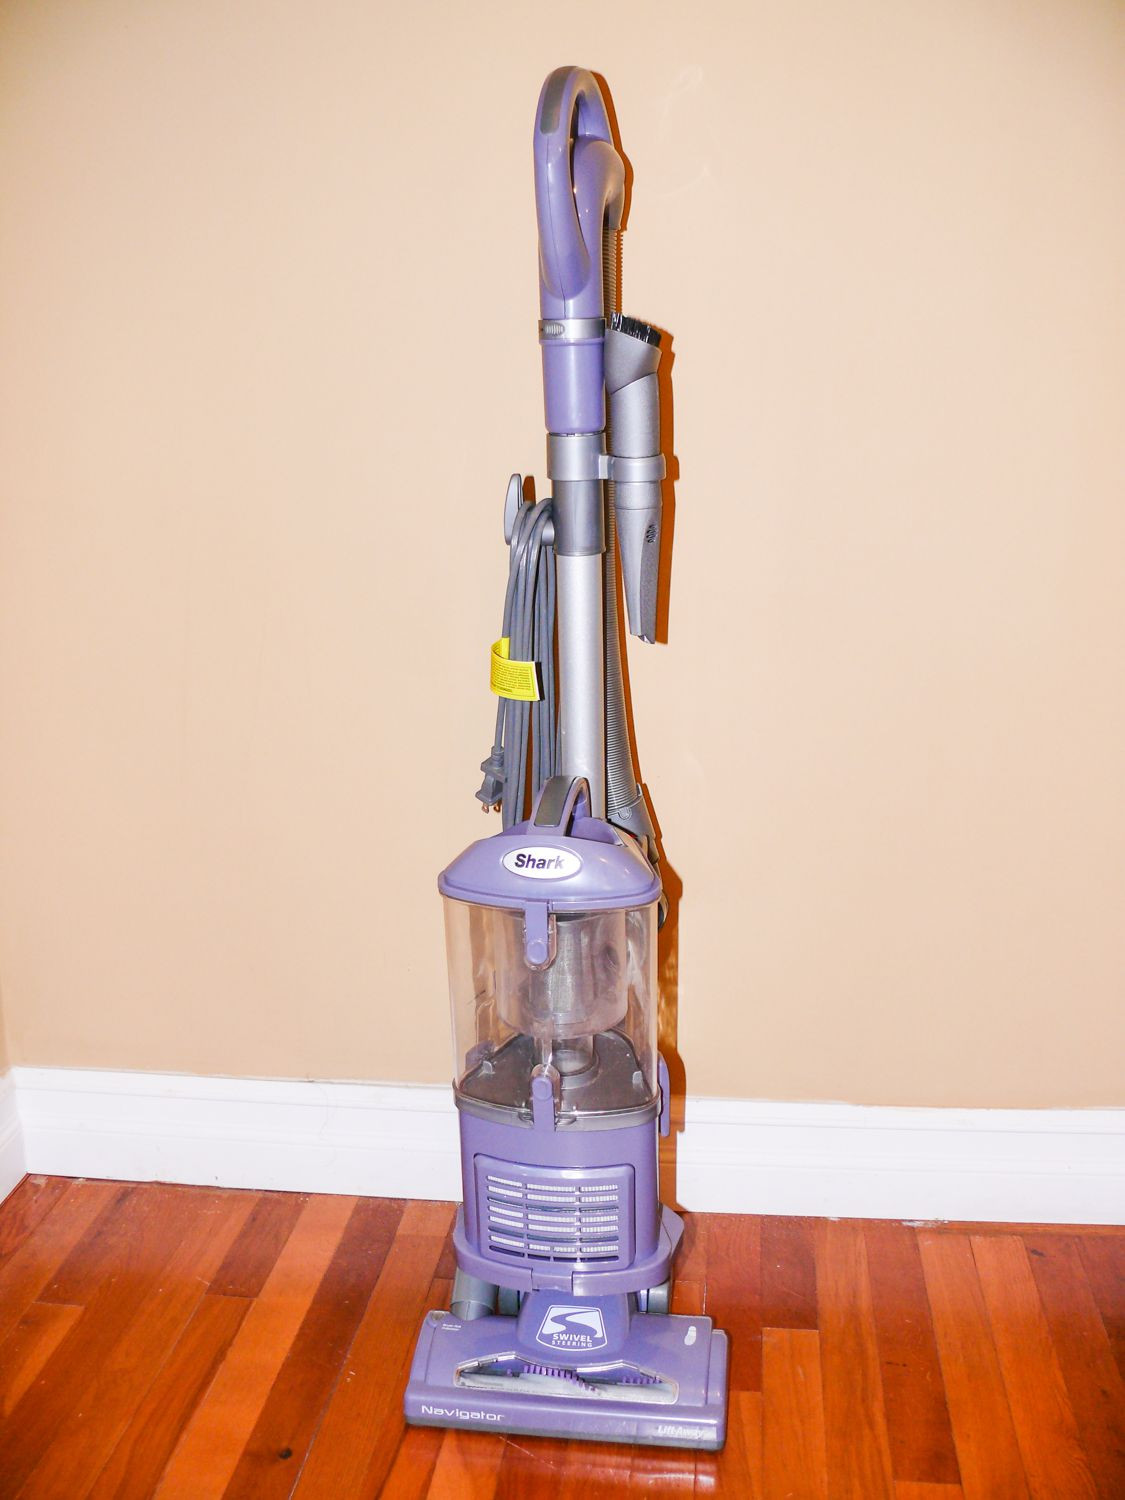 Hardwood Flooring Vacuums Recommendations Of the 10 Best Vacuum Cleaners to Buy In 2018 Regarding 4062974 2 4 5bbf71b6c9e77c00511018e2